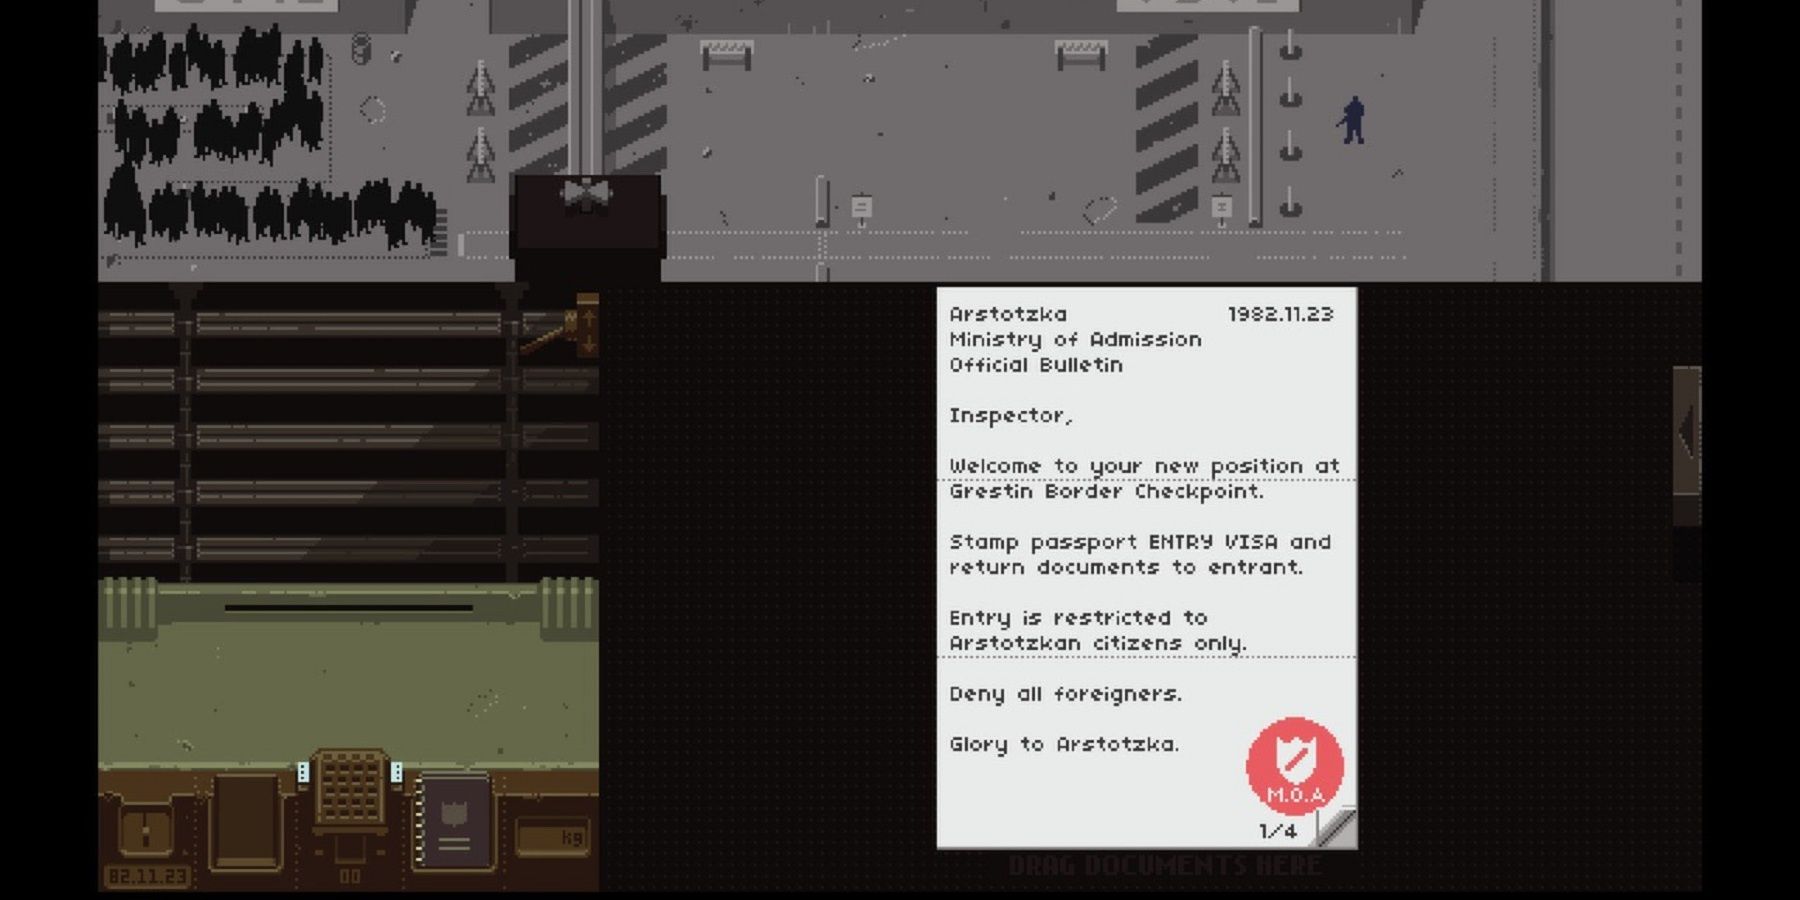 snippet of the player getting accepted as an immagration officer in Papers, Please